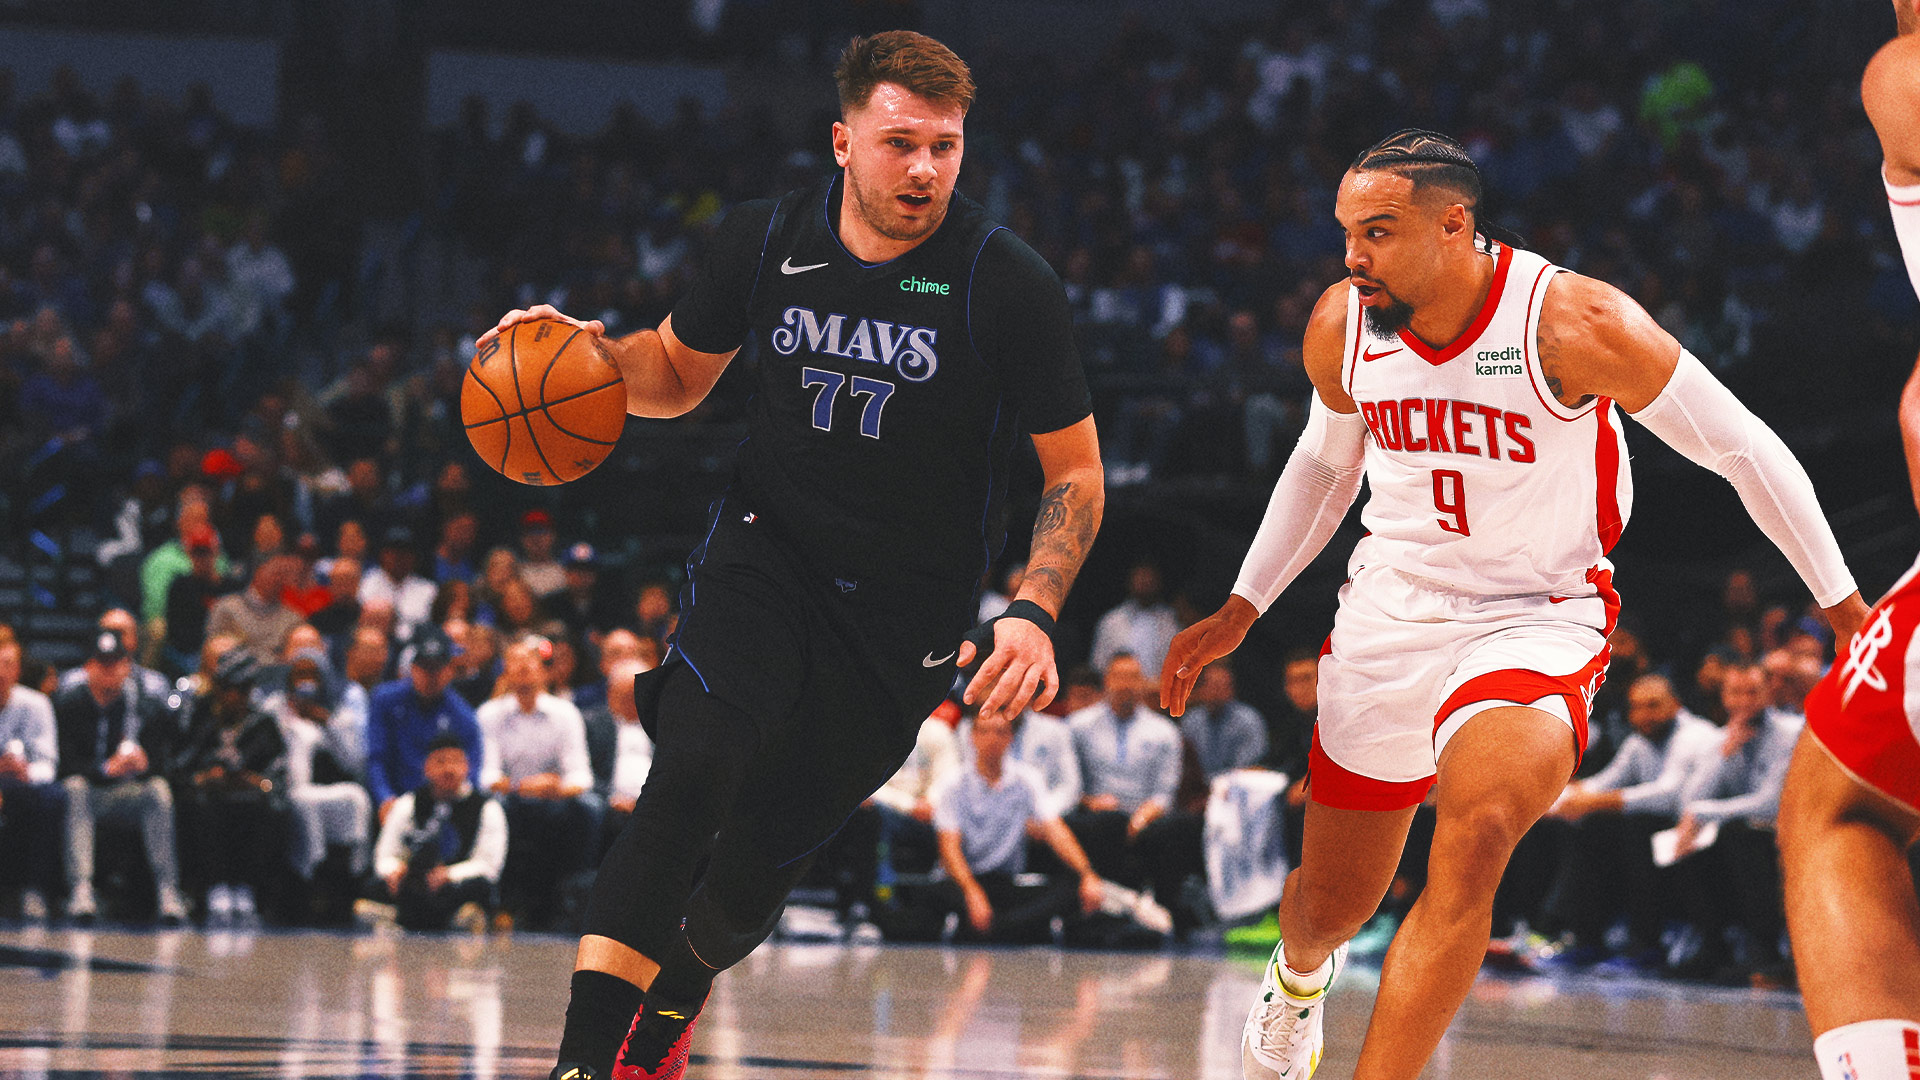 Luka Doncic scores 41, Mavericks prevent Rockets from advancing with a 121-115 victory